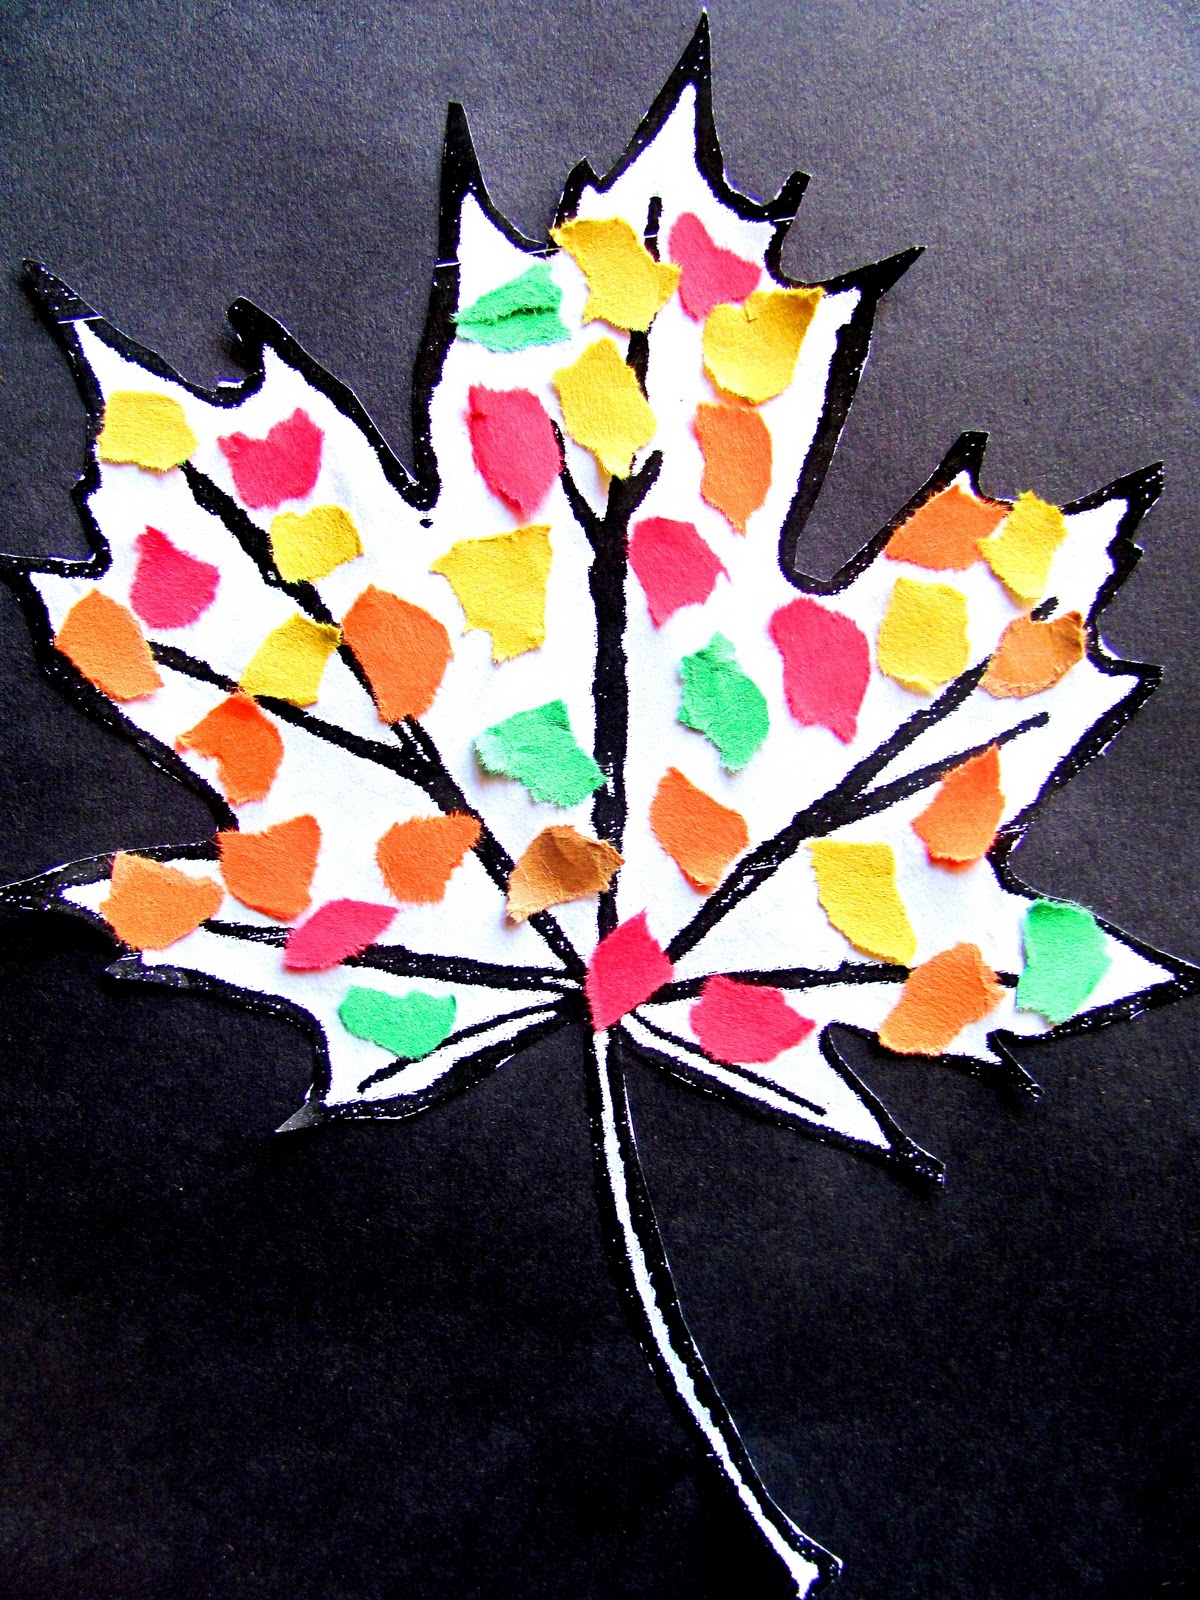 colormehappy: Colorful fall leaves - A fun art project using ...